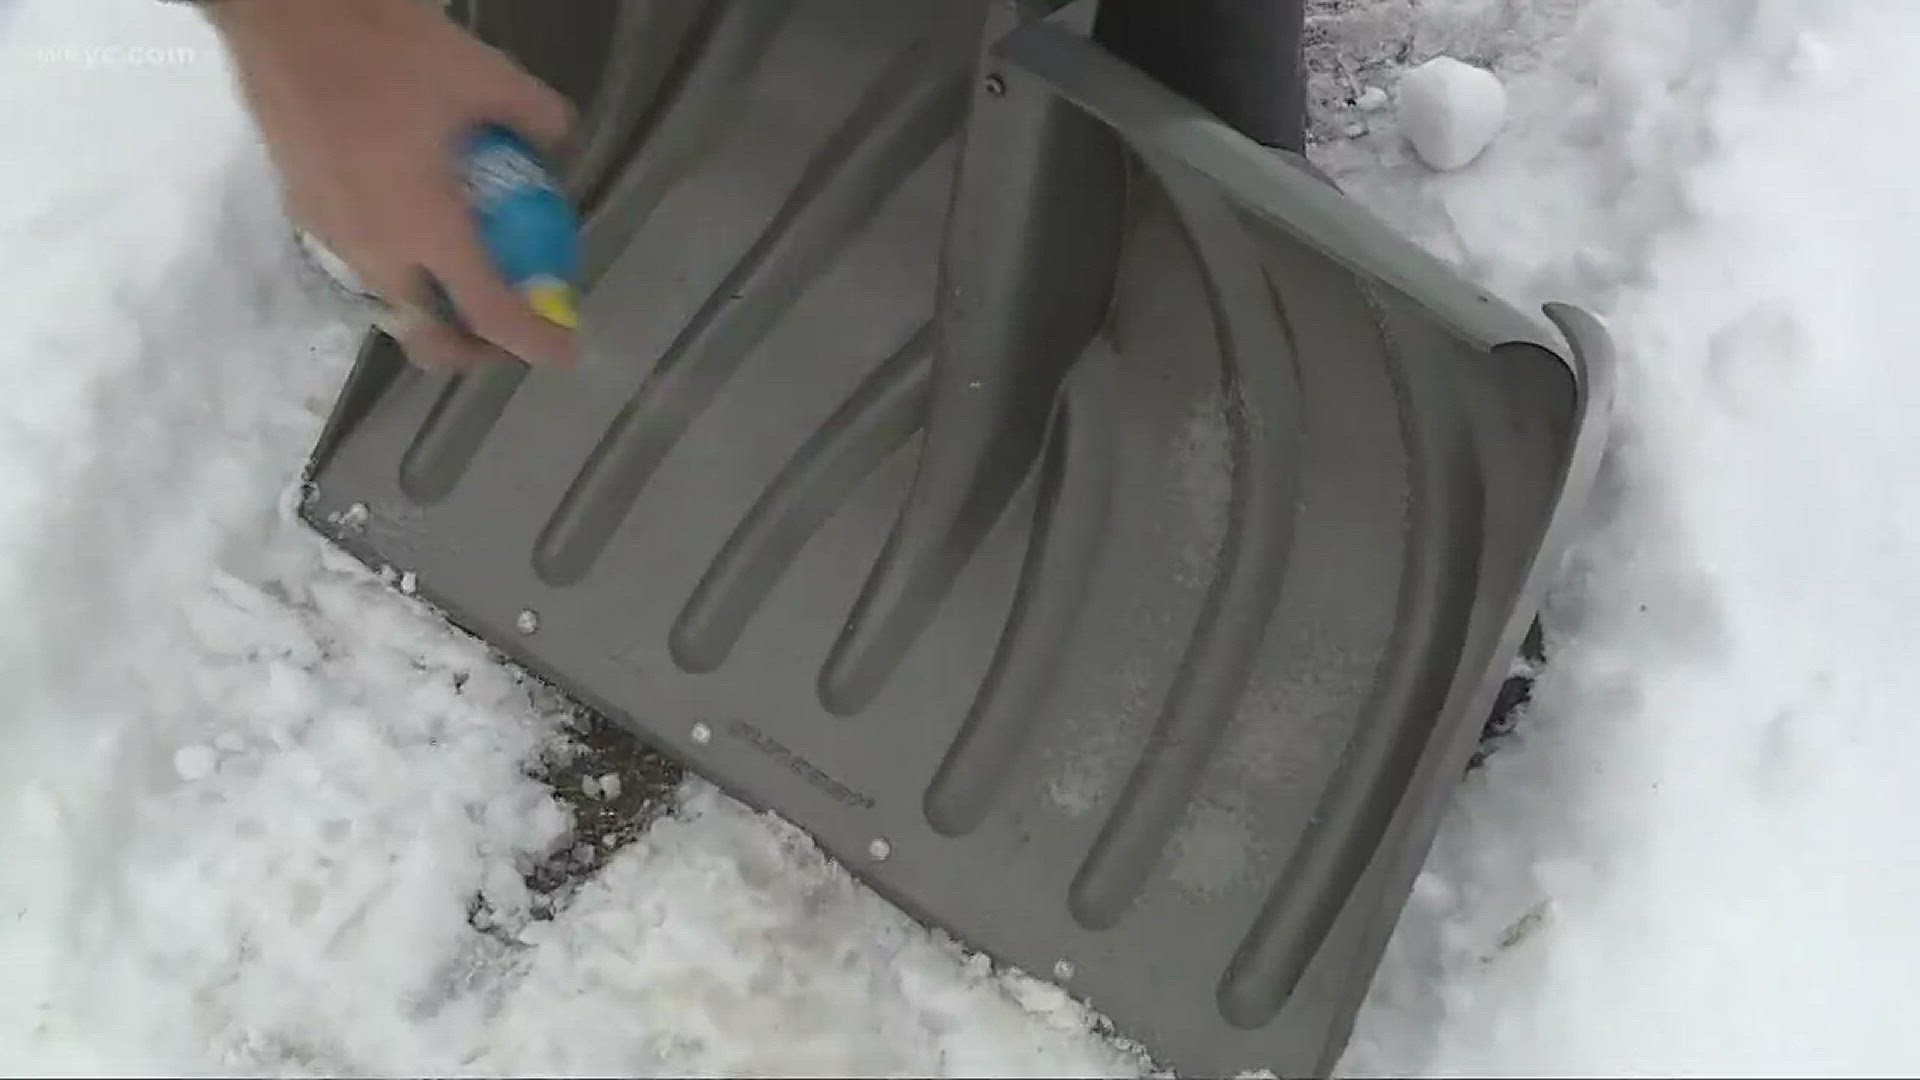 Winter got you down? Here are some useful cold weather hacks